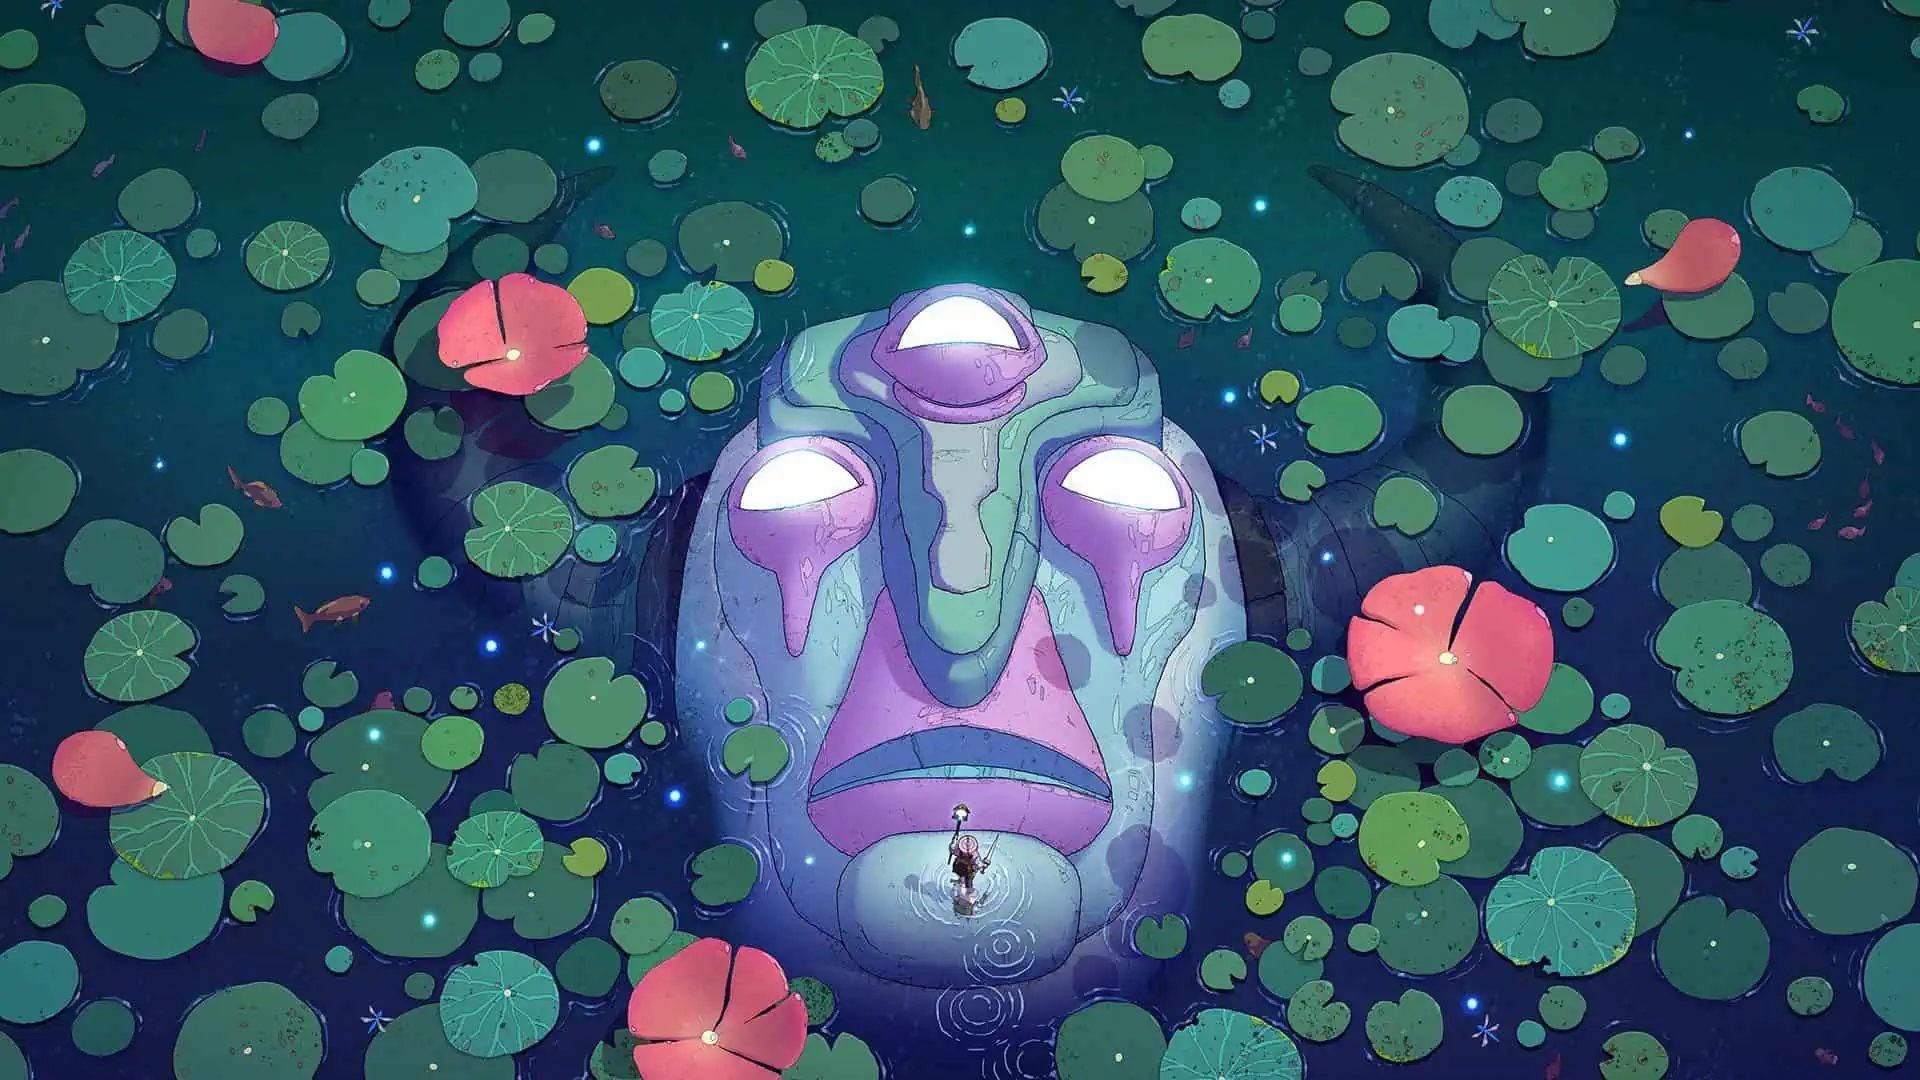 player's characters standing in a big blue and purple mask floating in a lake filled with lotus leaves around